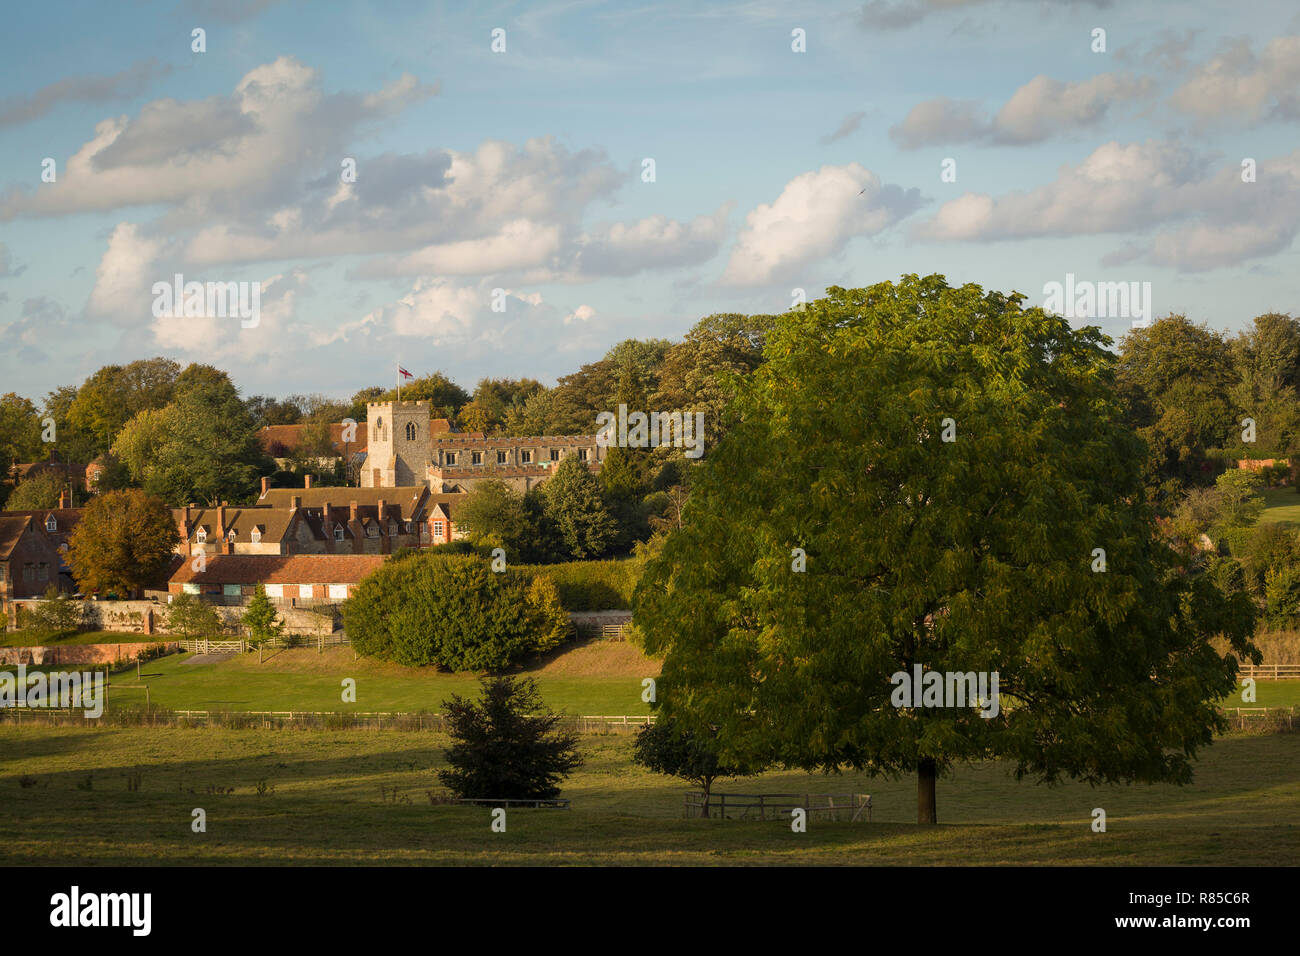 Saint Bartholomew's Church, Ewelme, with the village school and almshouses in the evening light Stock Photo